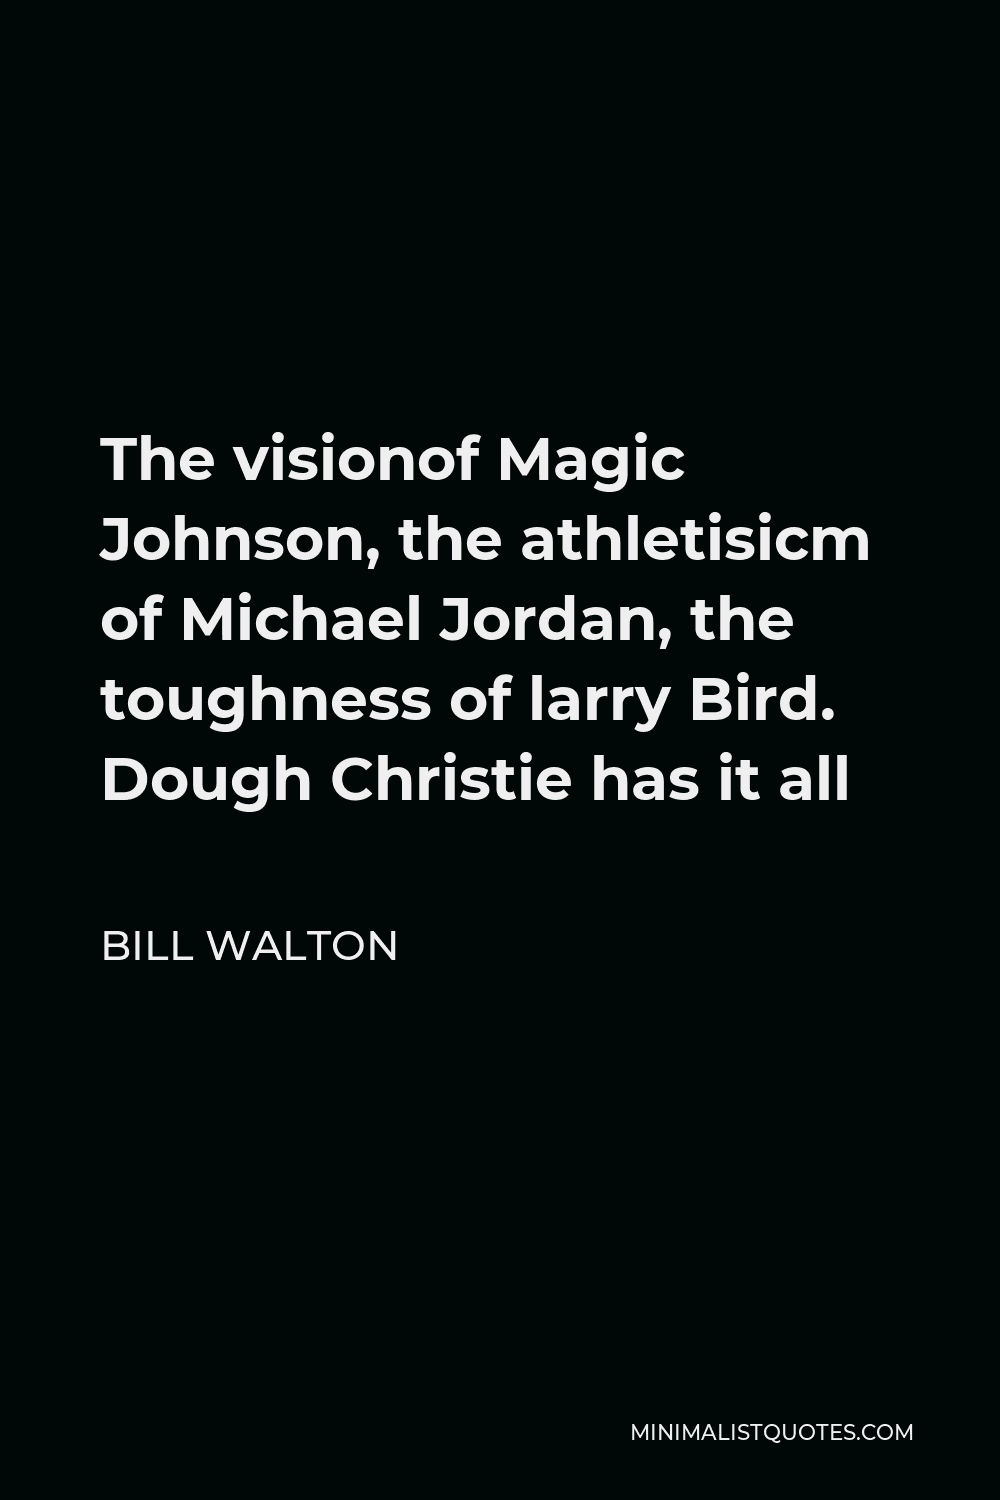 Bill Walton Quote - The visionof Magic Johnson, the athletisicm of Michael Jordan, the toughness of larry Bird. Dough Christie has it all